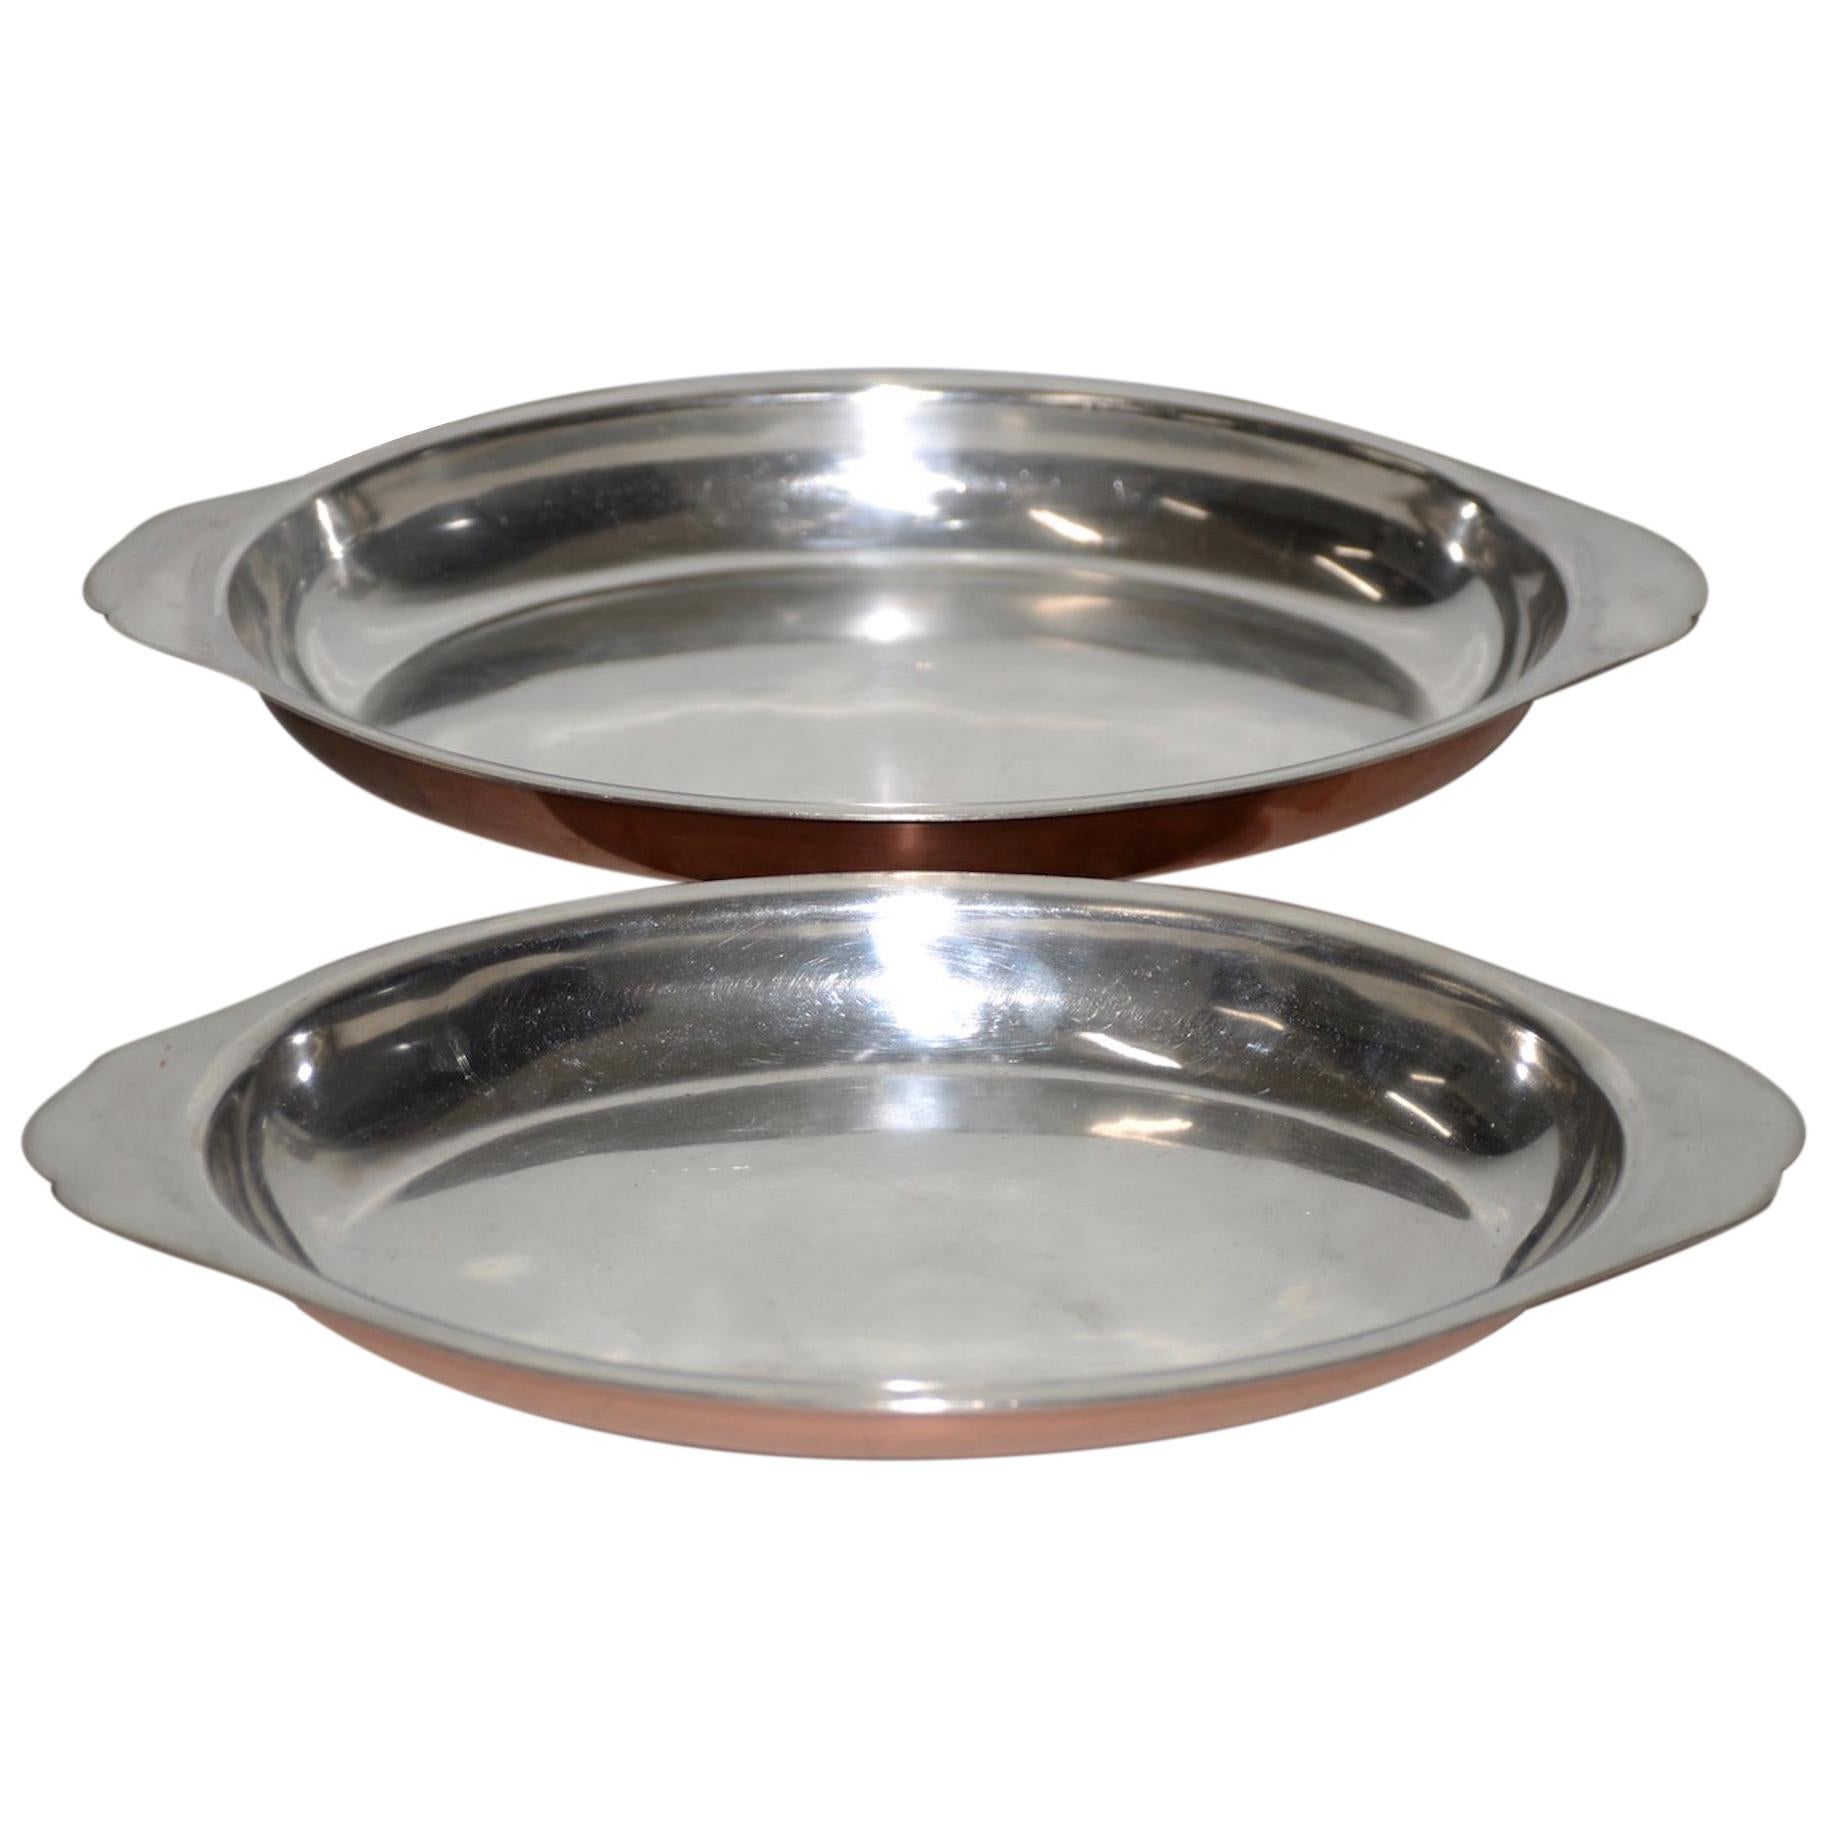 Joseph Heinrichs, New York. Pure Copper and Sterling Silver Platters